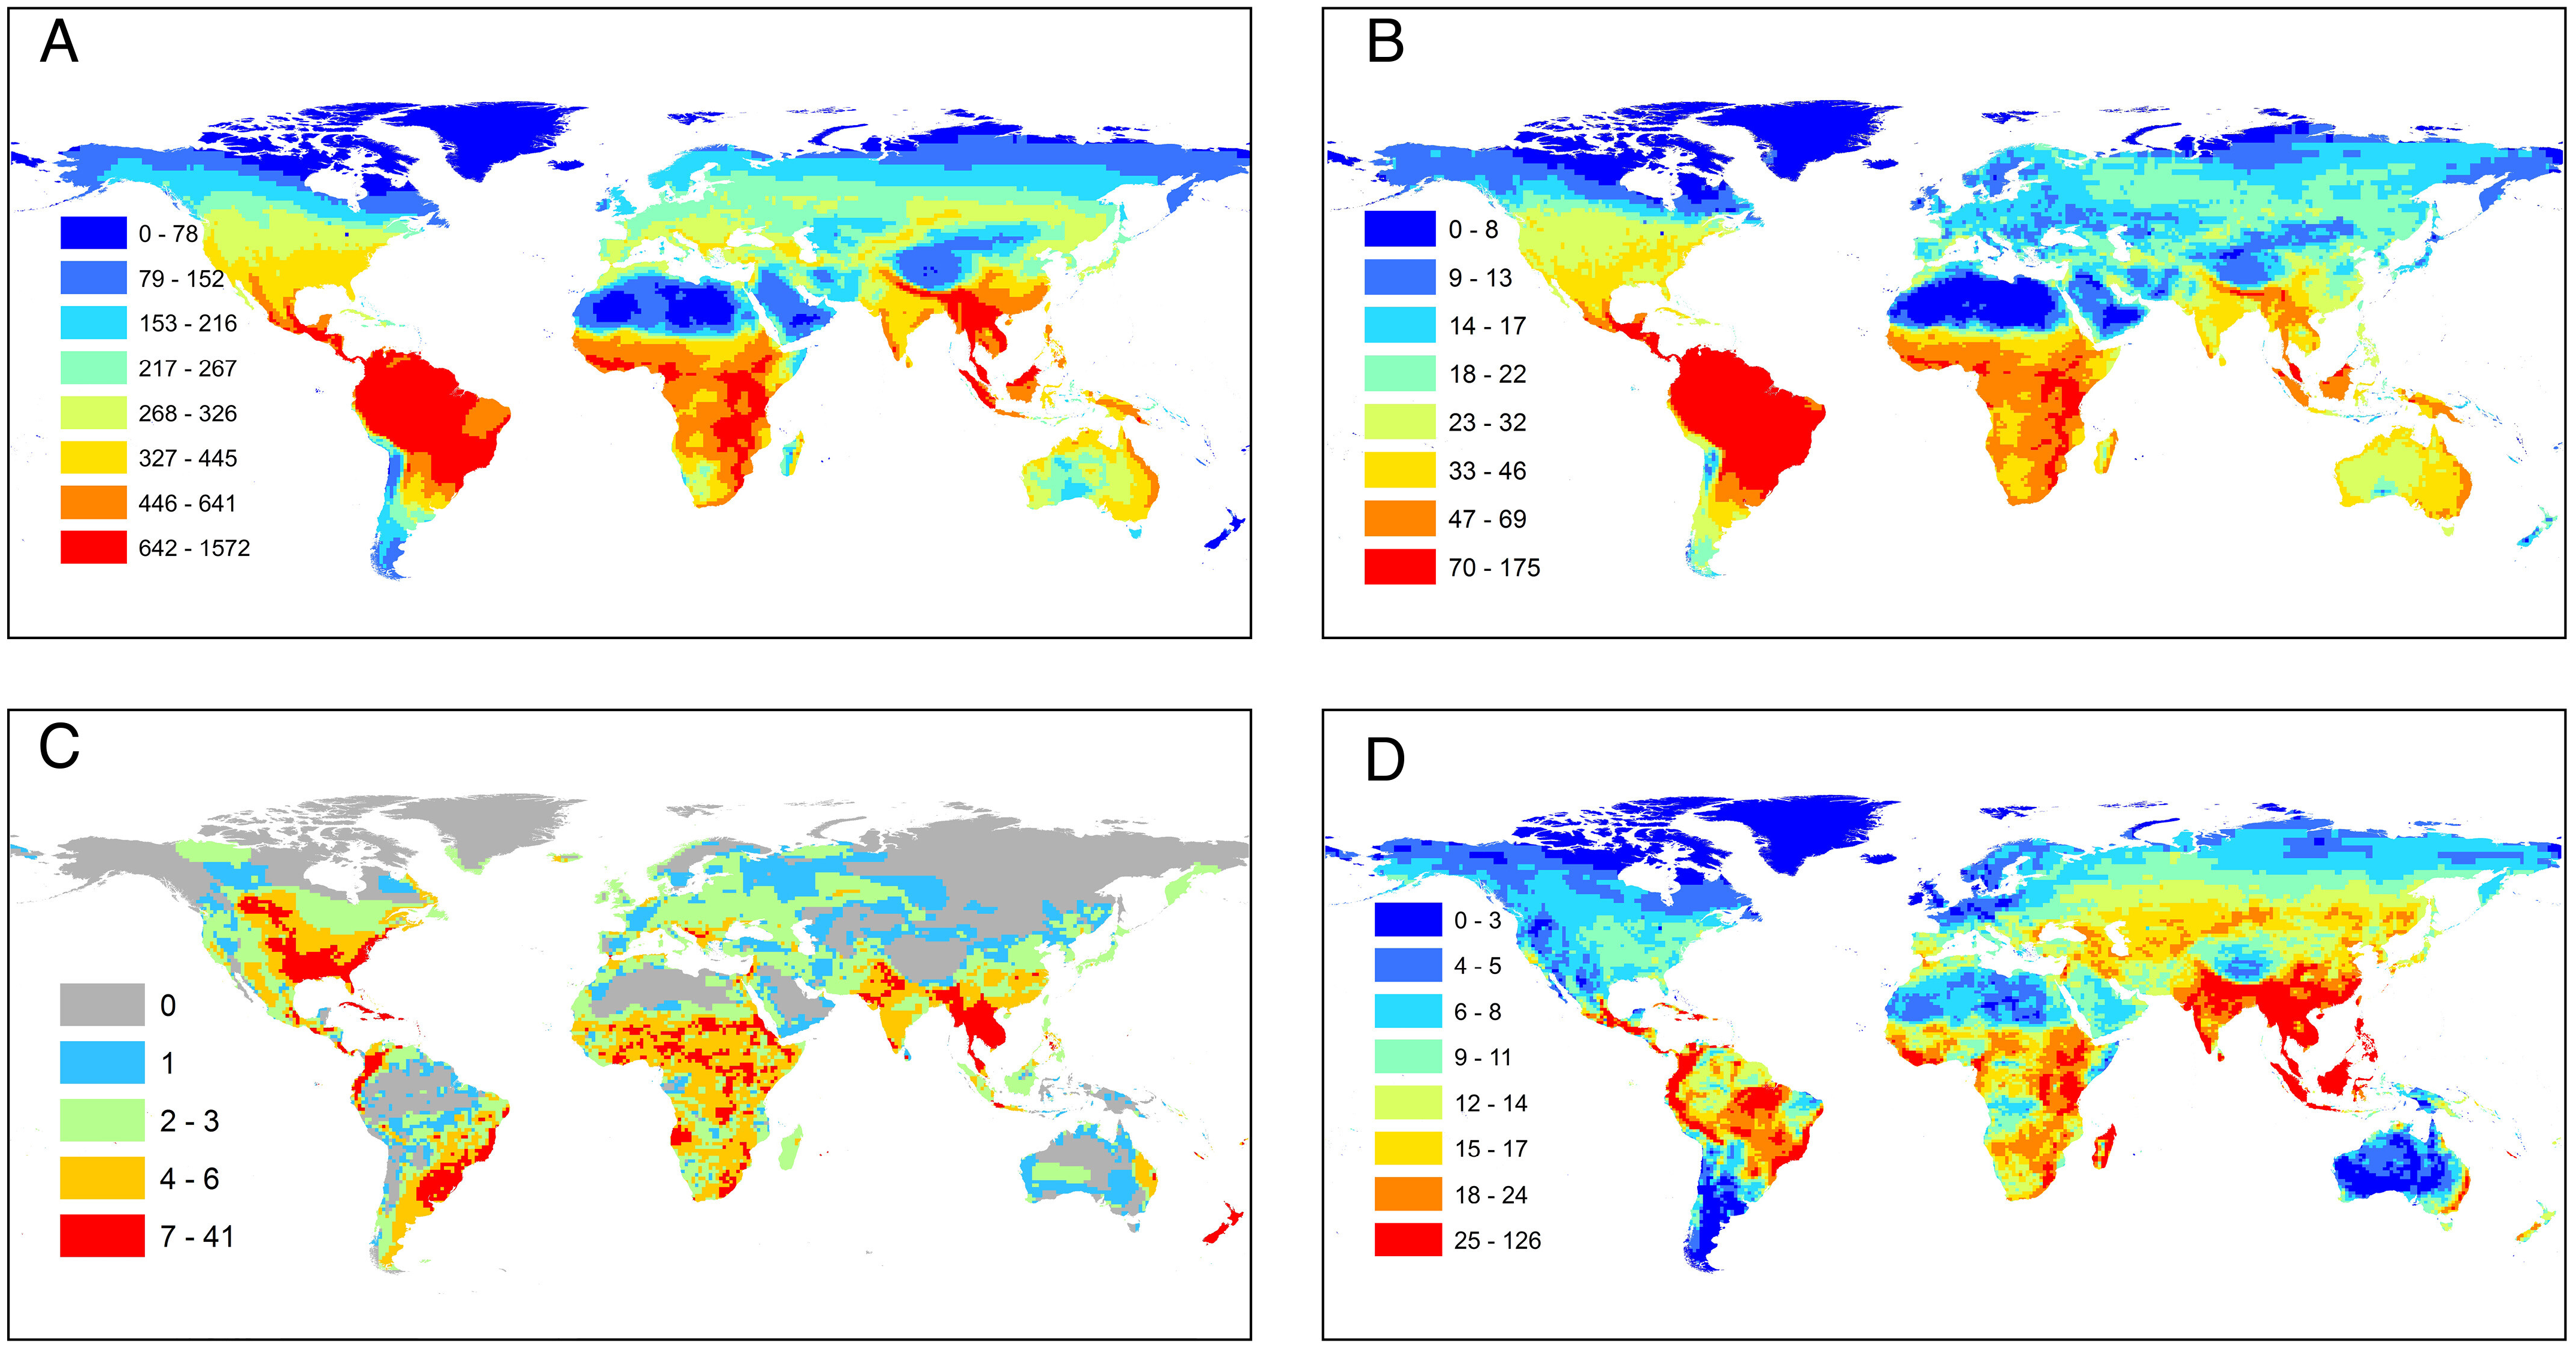 Patterns of distribution of extinct and extant land vertebrate genera. Most genera and monotypic ones are concentrated in tropical and subtropical regions of all continents. Patterns of distribution of extinction and extinction risk are different, showing some temperate regions such as Eastern US as concentration hotspots. (A) Total genera; (B) Monotypic genera; (C) Extinct genera and species; (D) Endangered (CR, EN, VU) genera. Graphic: Ceballos and Ehrlich, 2023 / PNAS